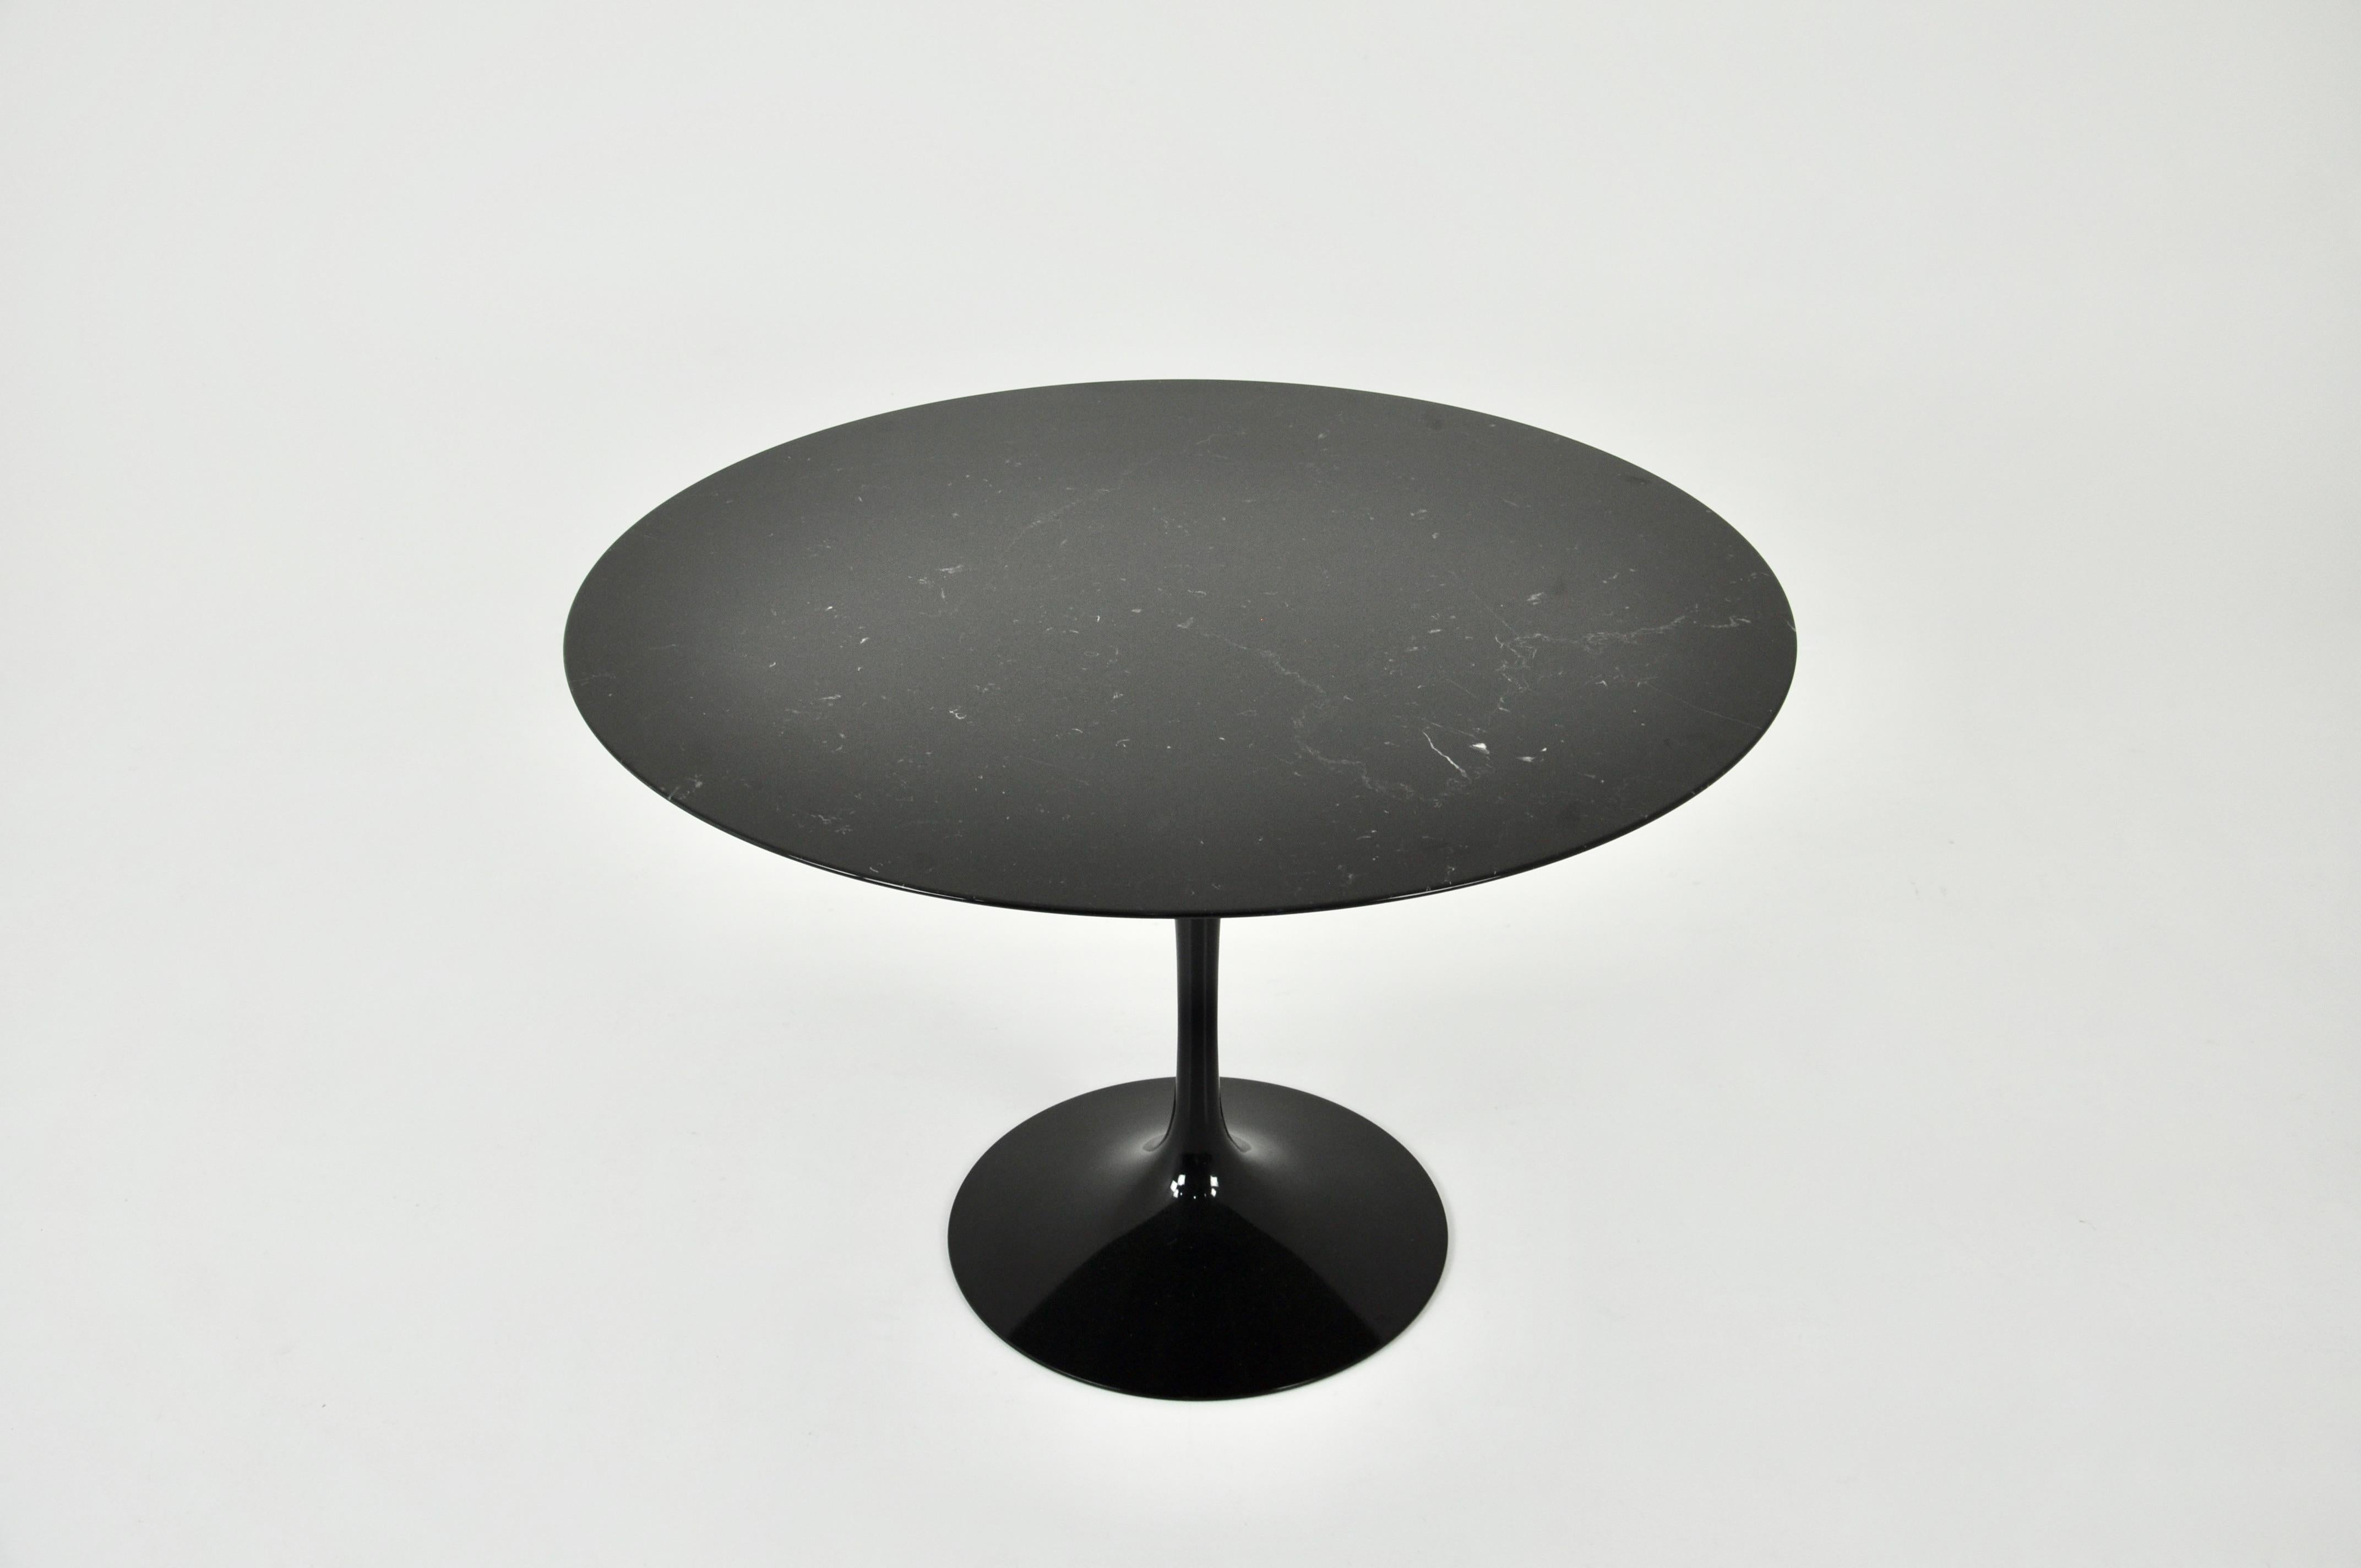 Black marble table with black aluminium legs. Stamped knoll under the foot and shelf. Wear due to time and age of the table.